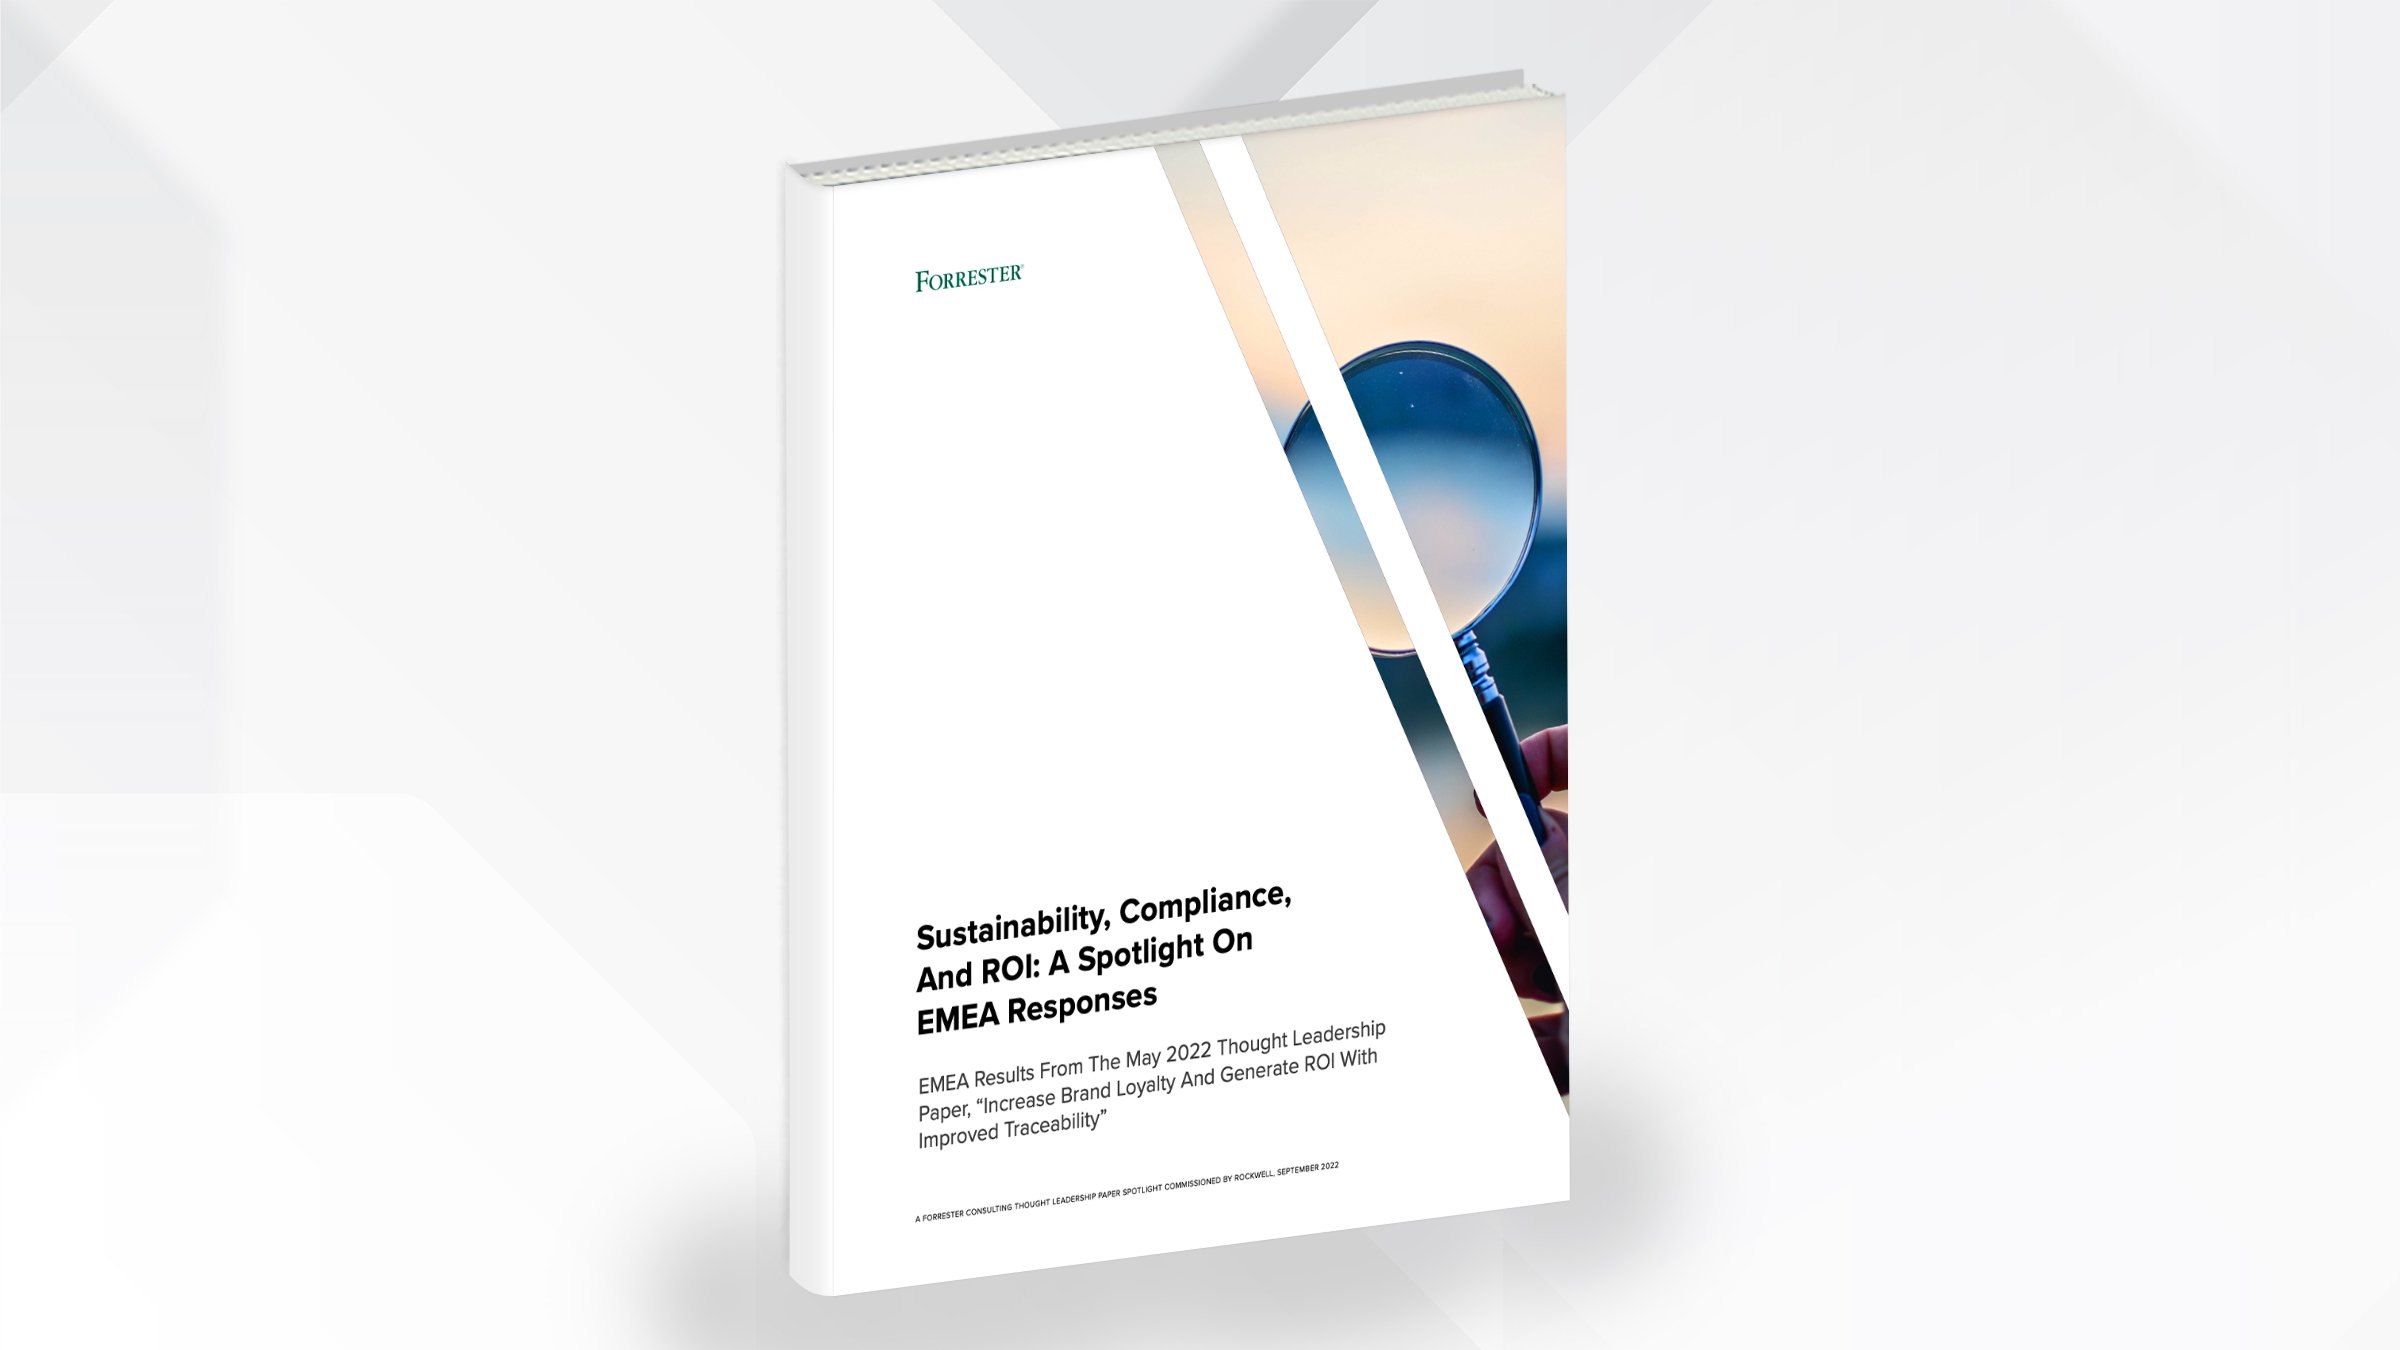 Forrester: Sustainability, Compliance, and ROI: A Spotlight on EMEA Responses